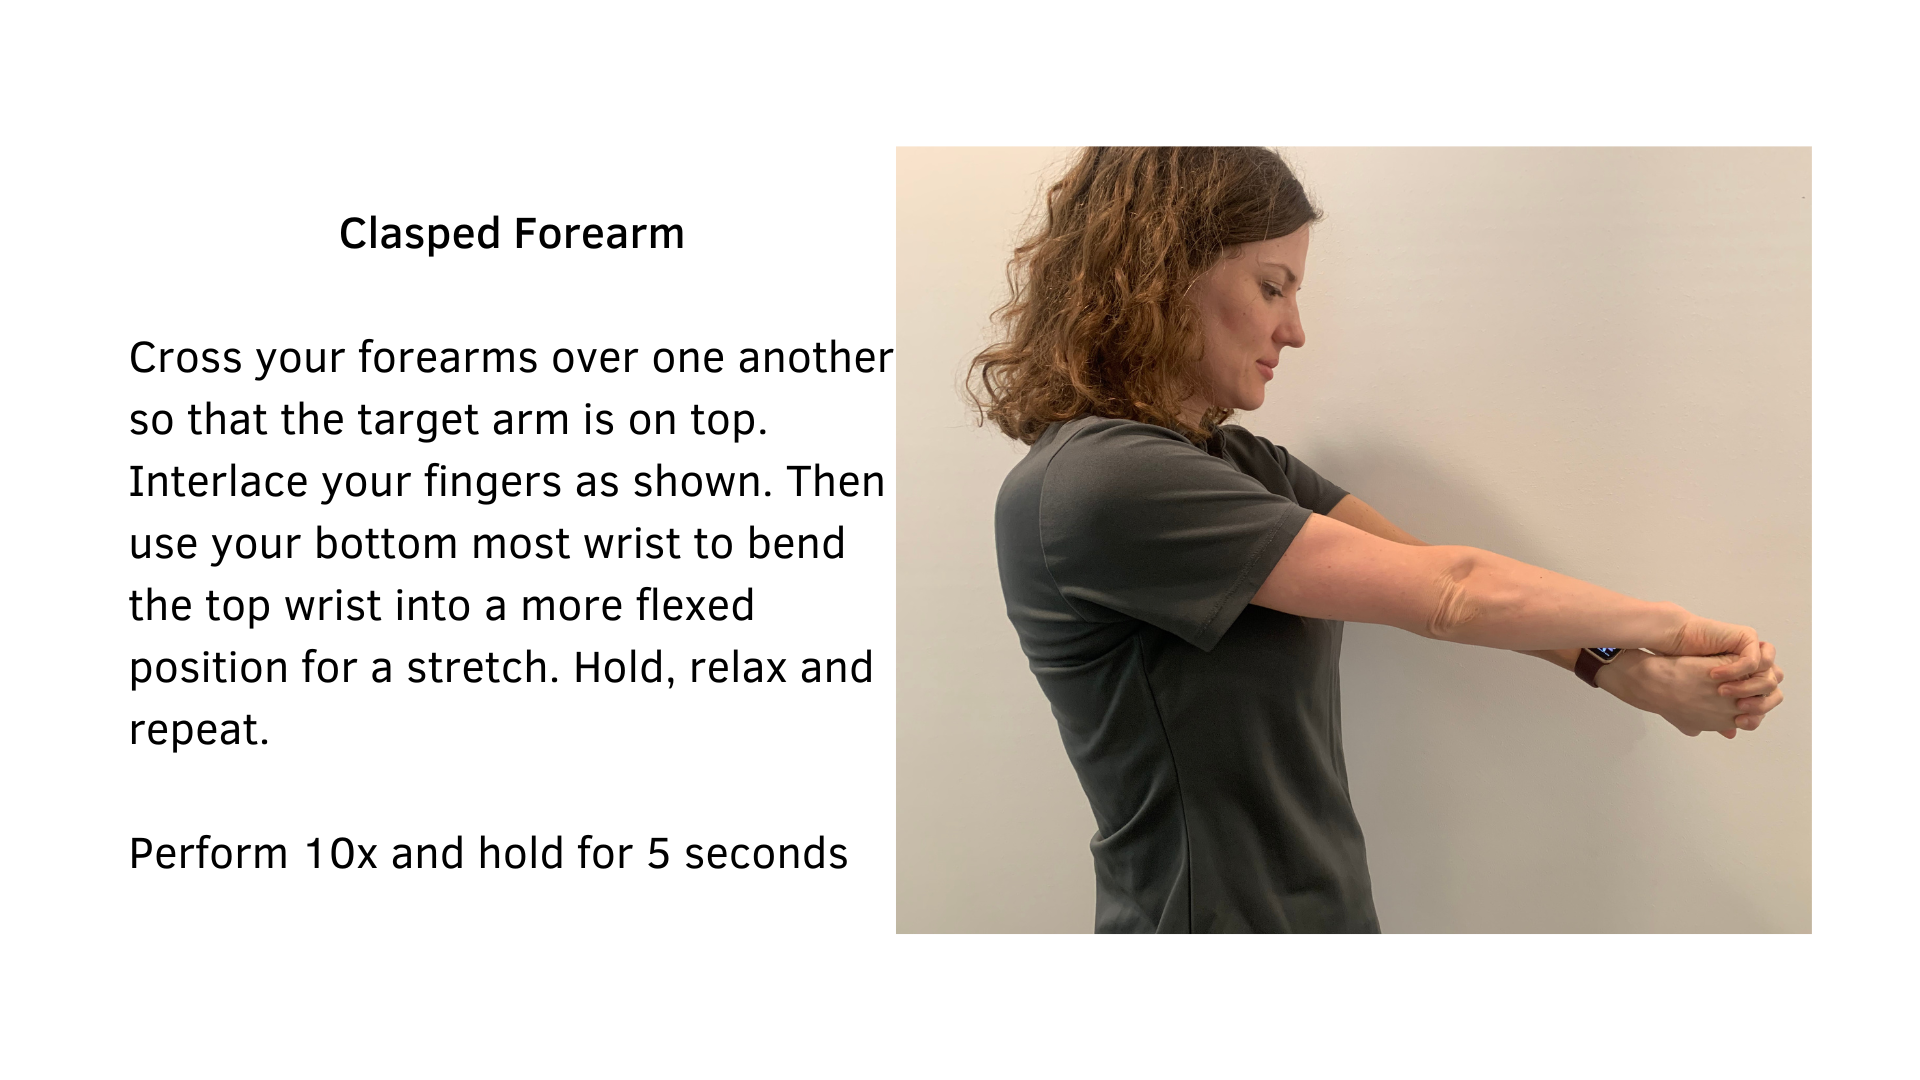 Black text on a white background that reads, "Clasped Forearm: Cross your forearms over one another so that the target arm is on top. Interlace your fingers as shown. Then use your bottom most wrist to bend the top wrist into a more flexed position for a stretch. Hold, relax and repeat. Perform 10x and hold for 5 seconds". A woman demonstrating the stretch is featured.